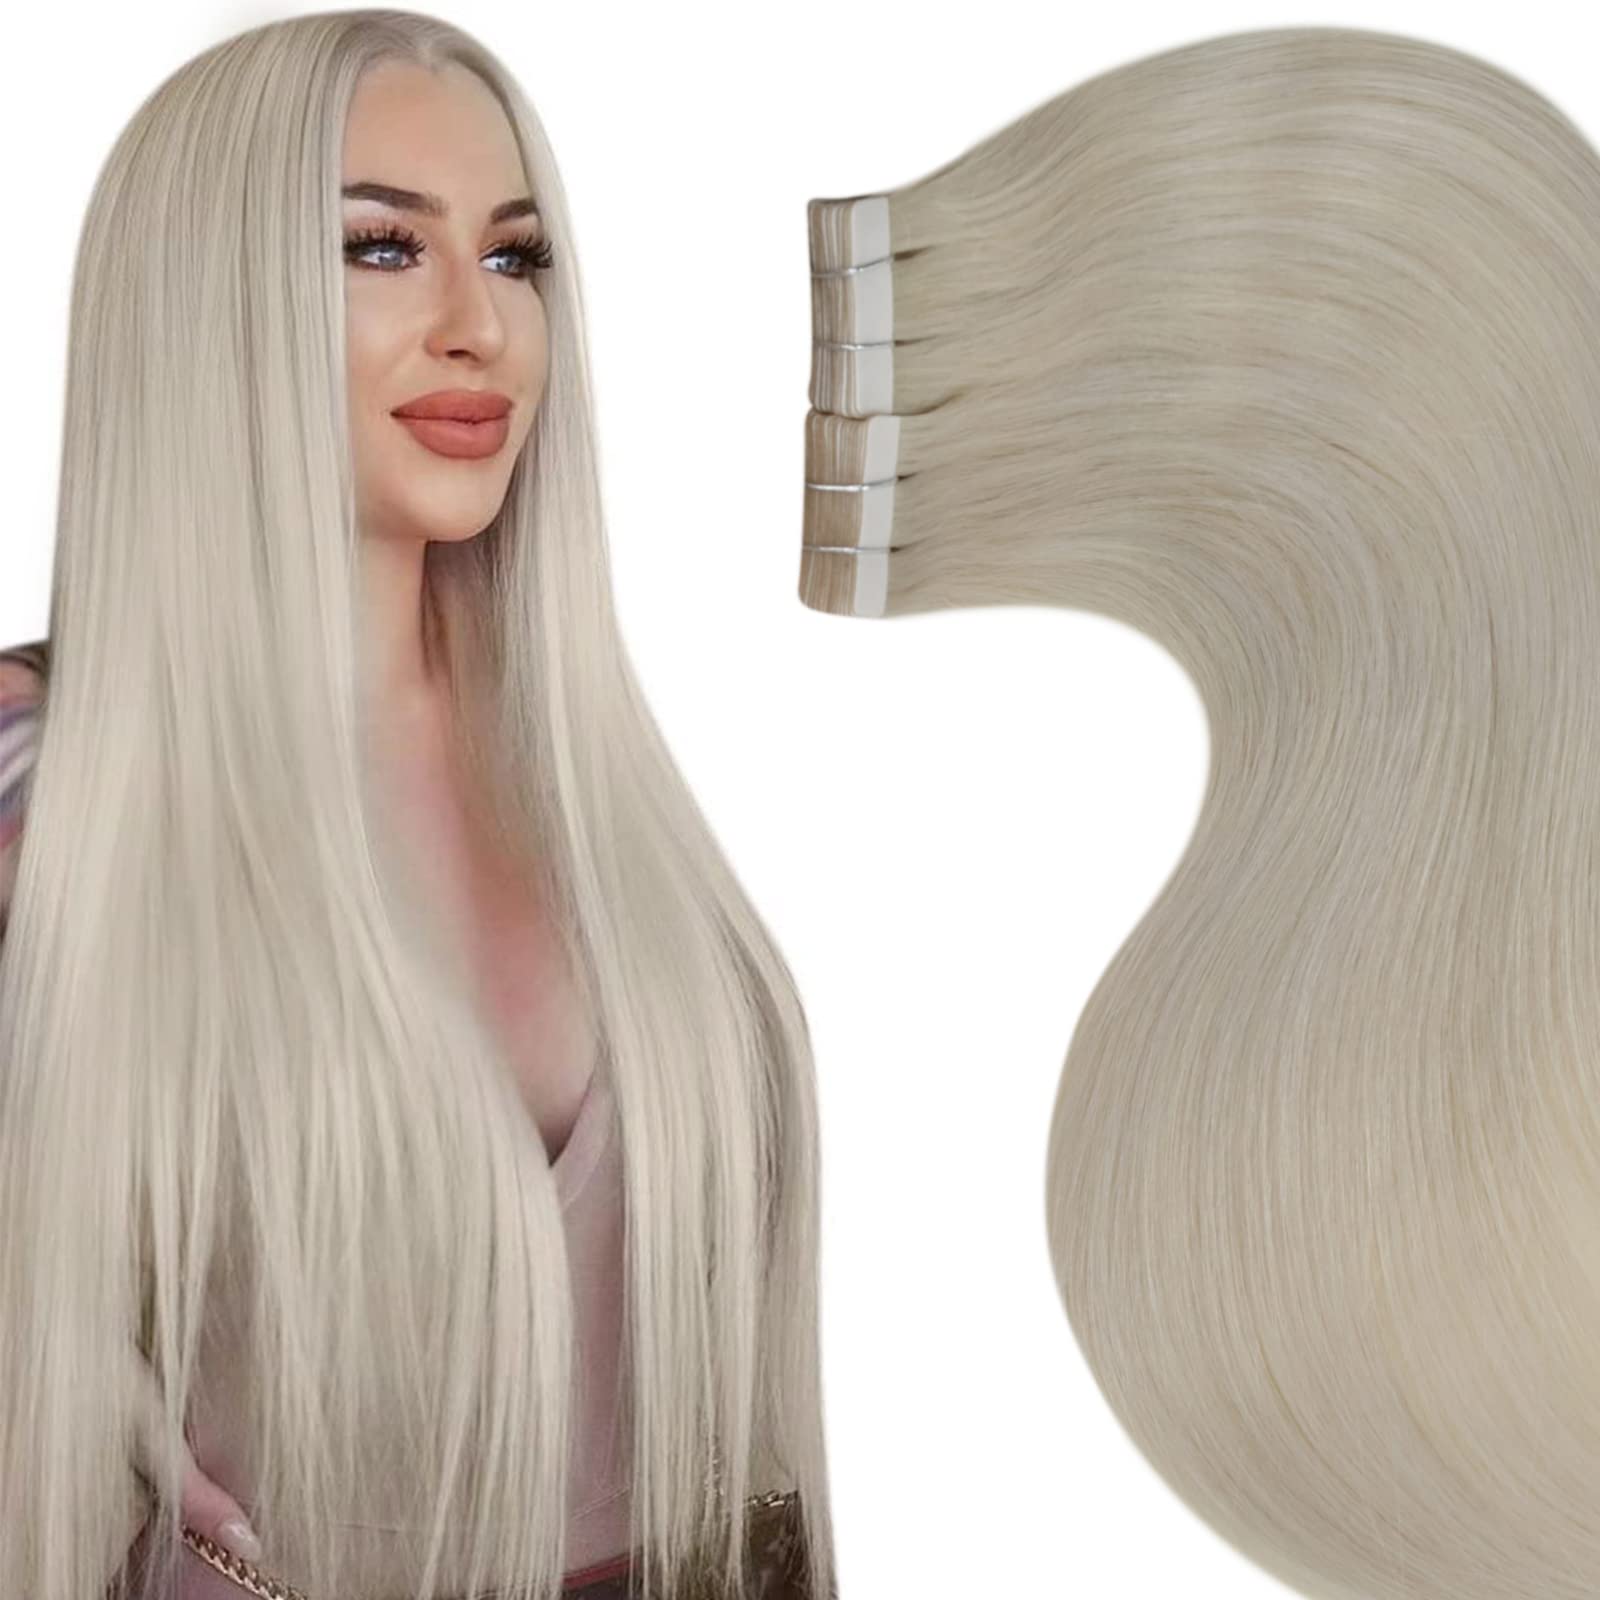 Laavoo Remy Tape In Hair Extensions Human Hair Platinum Blonde 30 Inch Long Hair Extensions Real Human Hair Tape Ins White Blond